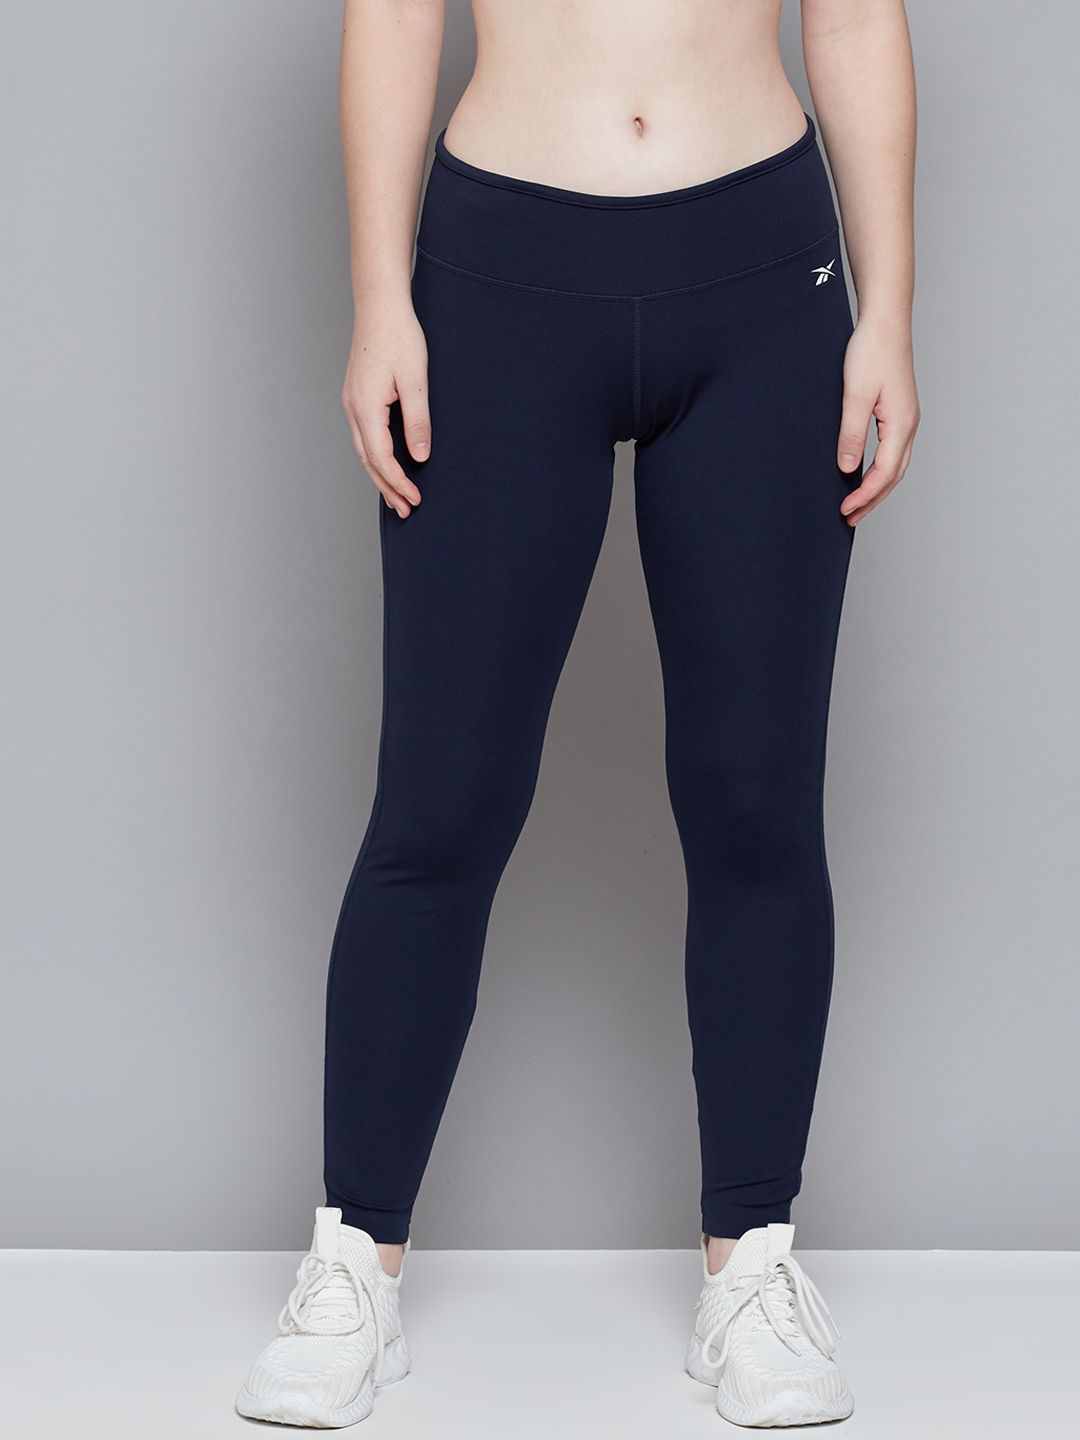 Reebok Women Navy Blue Solid Foundation Tights Price in India